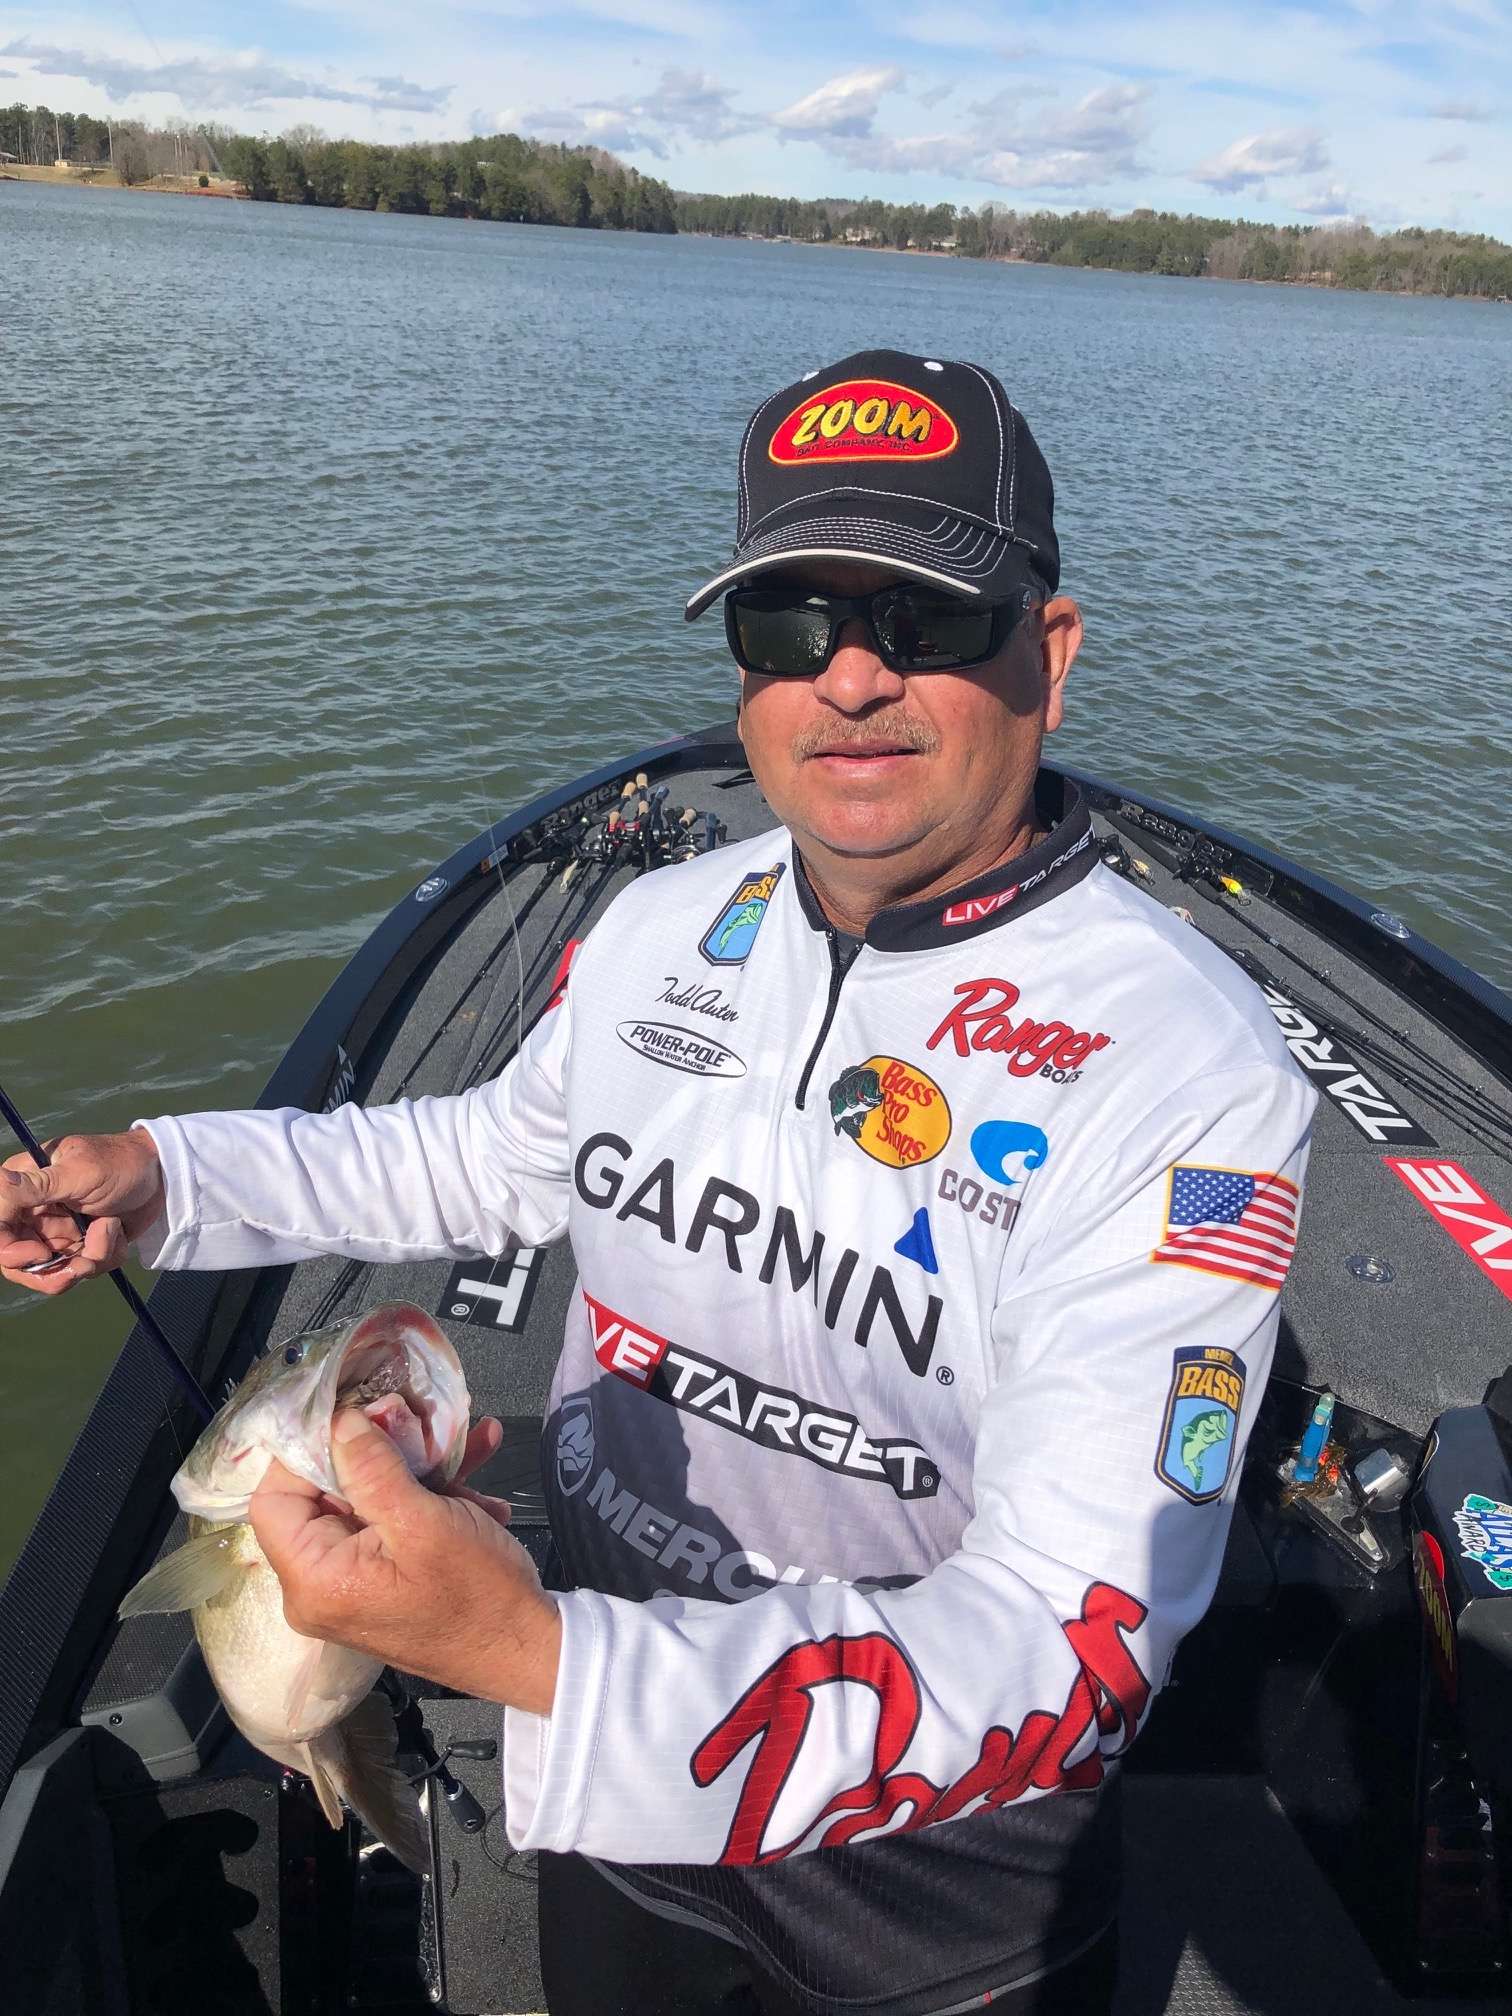 Another upgrade for Todd Auten....as you can see, he choked the Live Target crankbait.